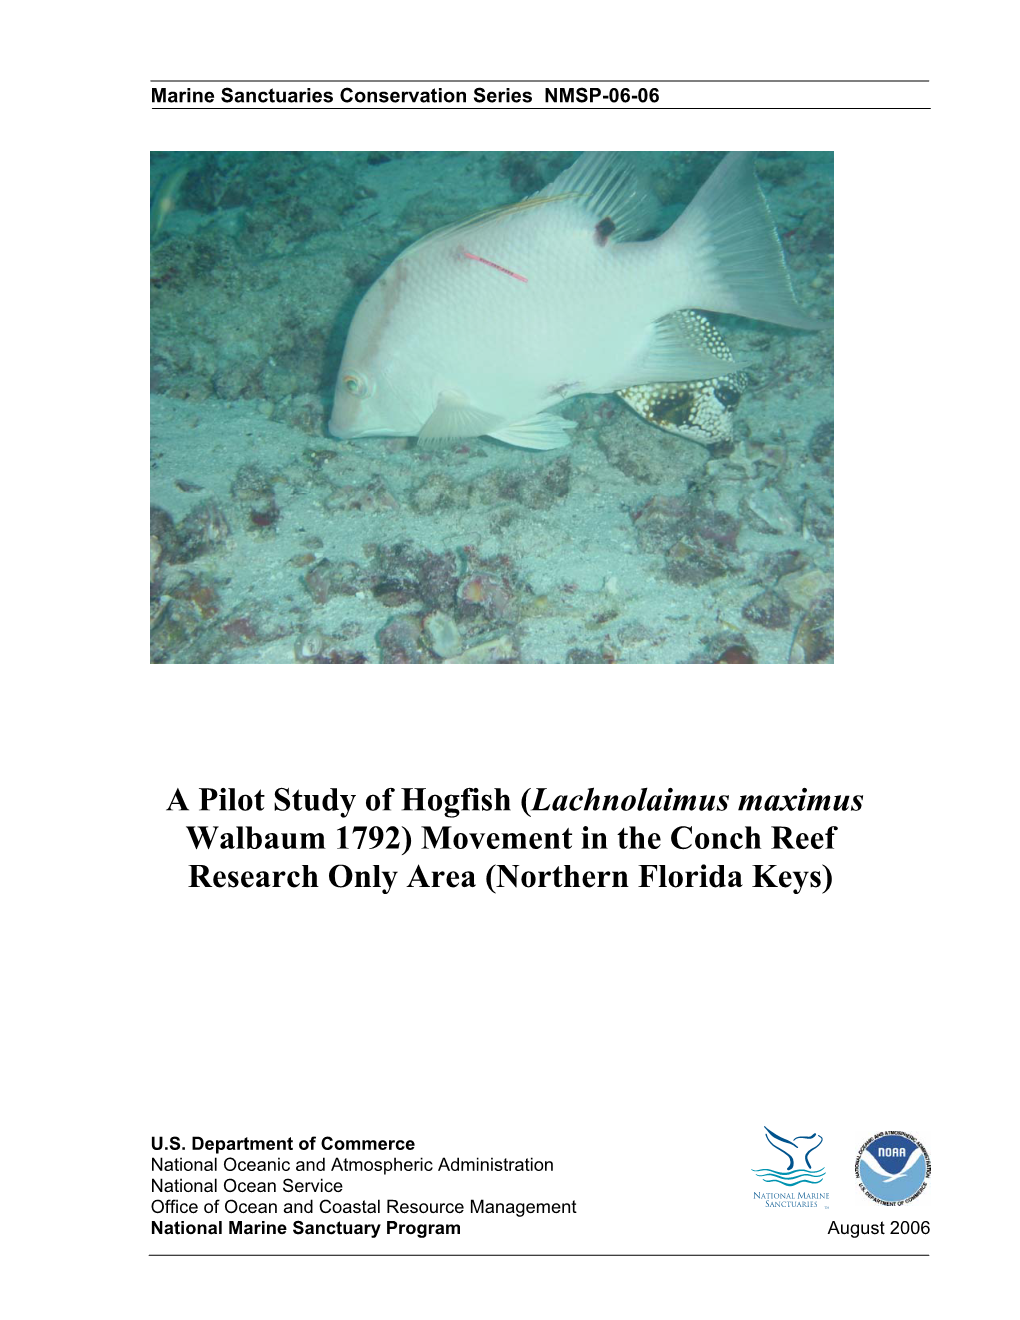 A Pilot Study of Hogfish (Lachnolaimus Maximus Walbaum 1792) Movement in the Conch Reef Research Only Area (Northern Florida Keys)